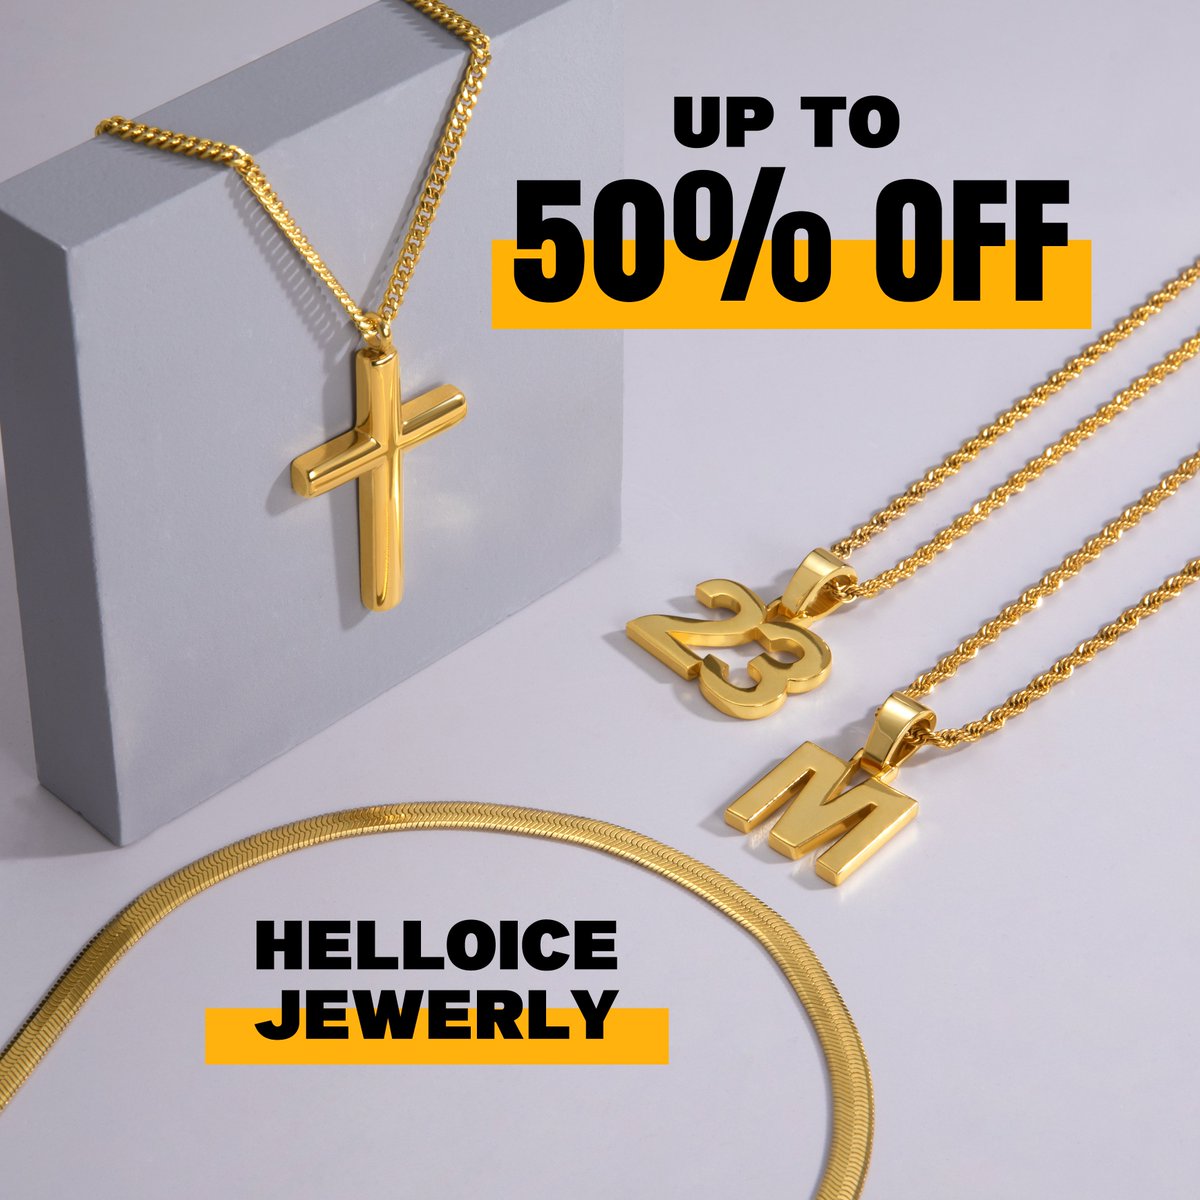 Stainless steel from Helloice jewelry!